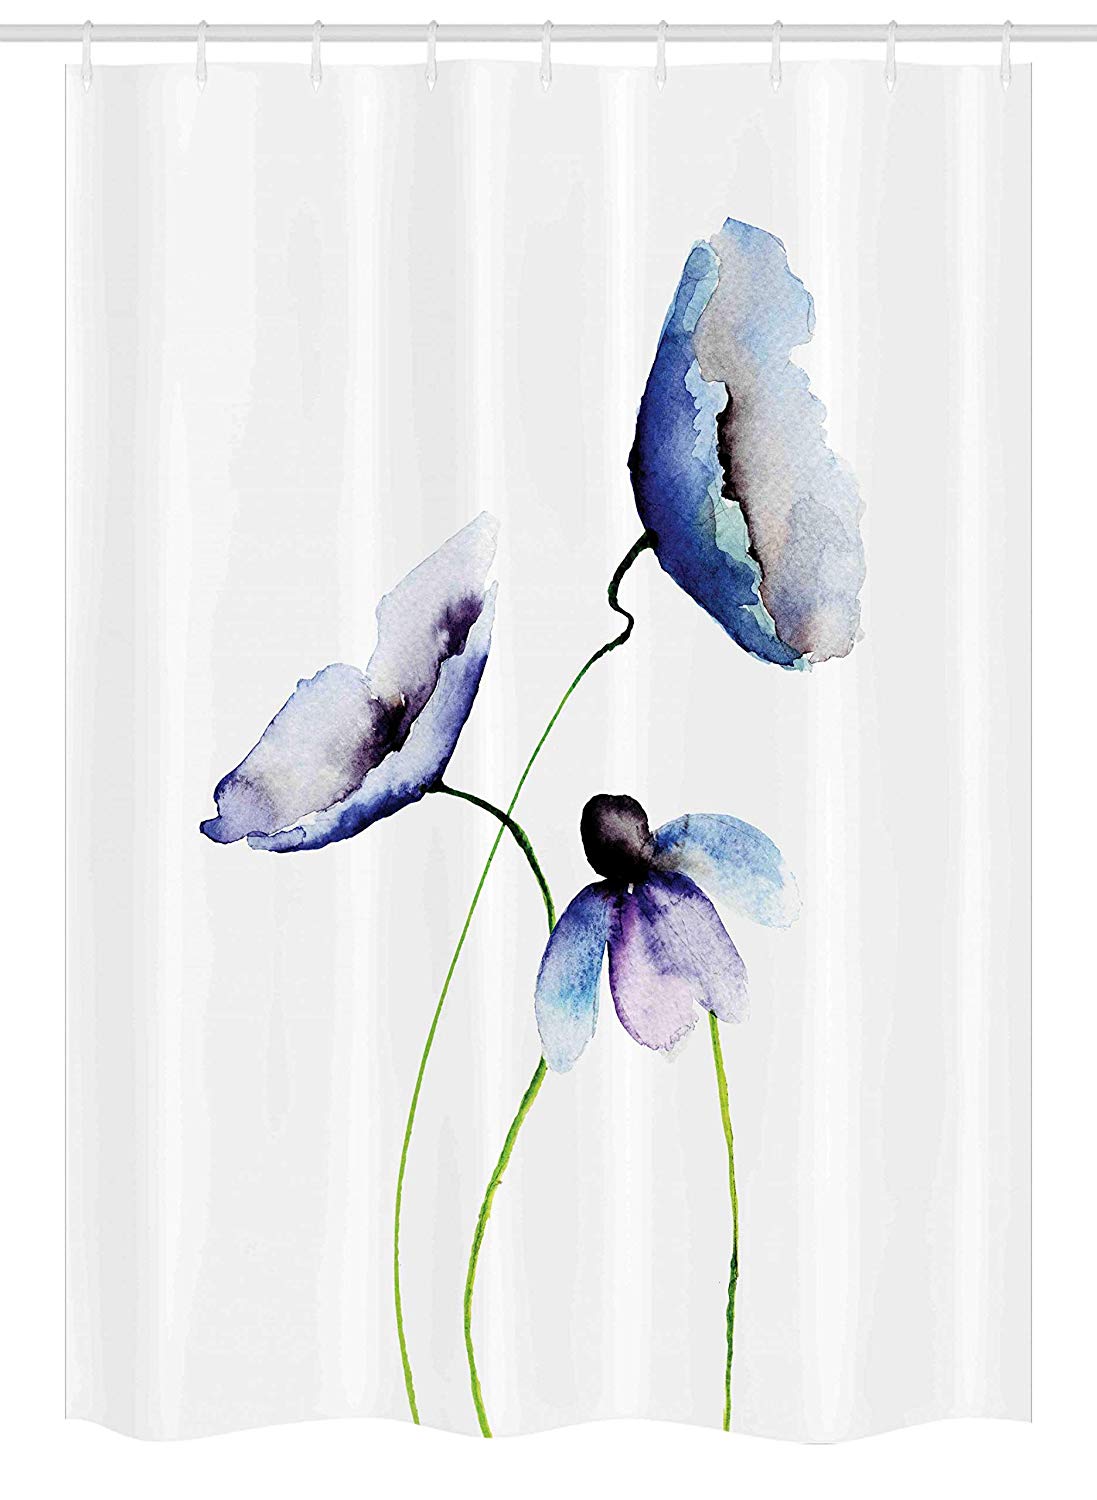 Ambesonne Watercolor Flower Stall Shower Curtain, Abstract Poppies Blossoms Simple Artistic Composition Picture, Fabric Bathroom Decor Set with Hooks, 54 W x 78 L Inches, Lavender Blue Green